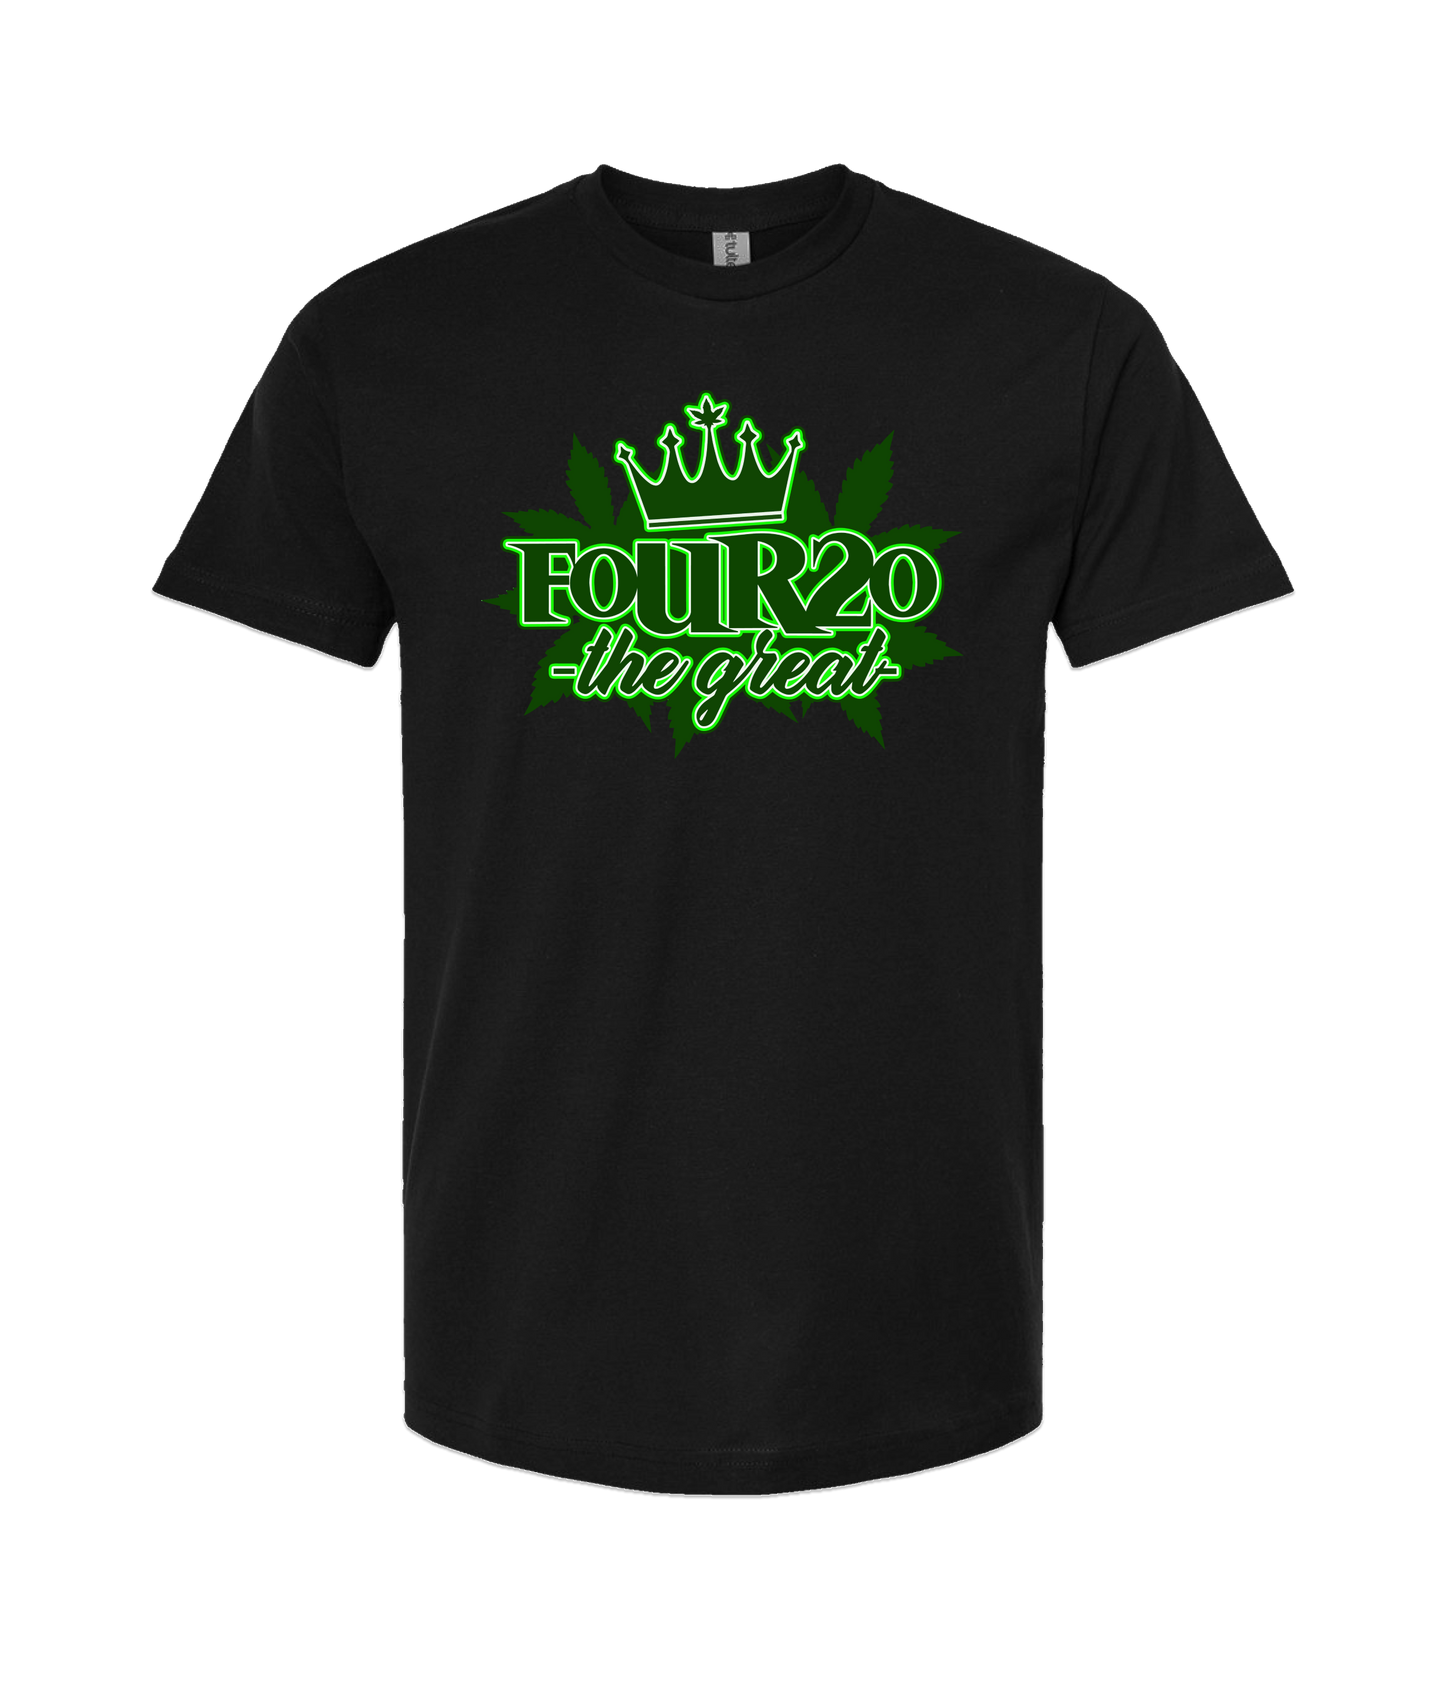 FOUR20 THE GREAT - 420TG - Black T Shirt